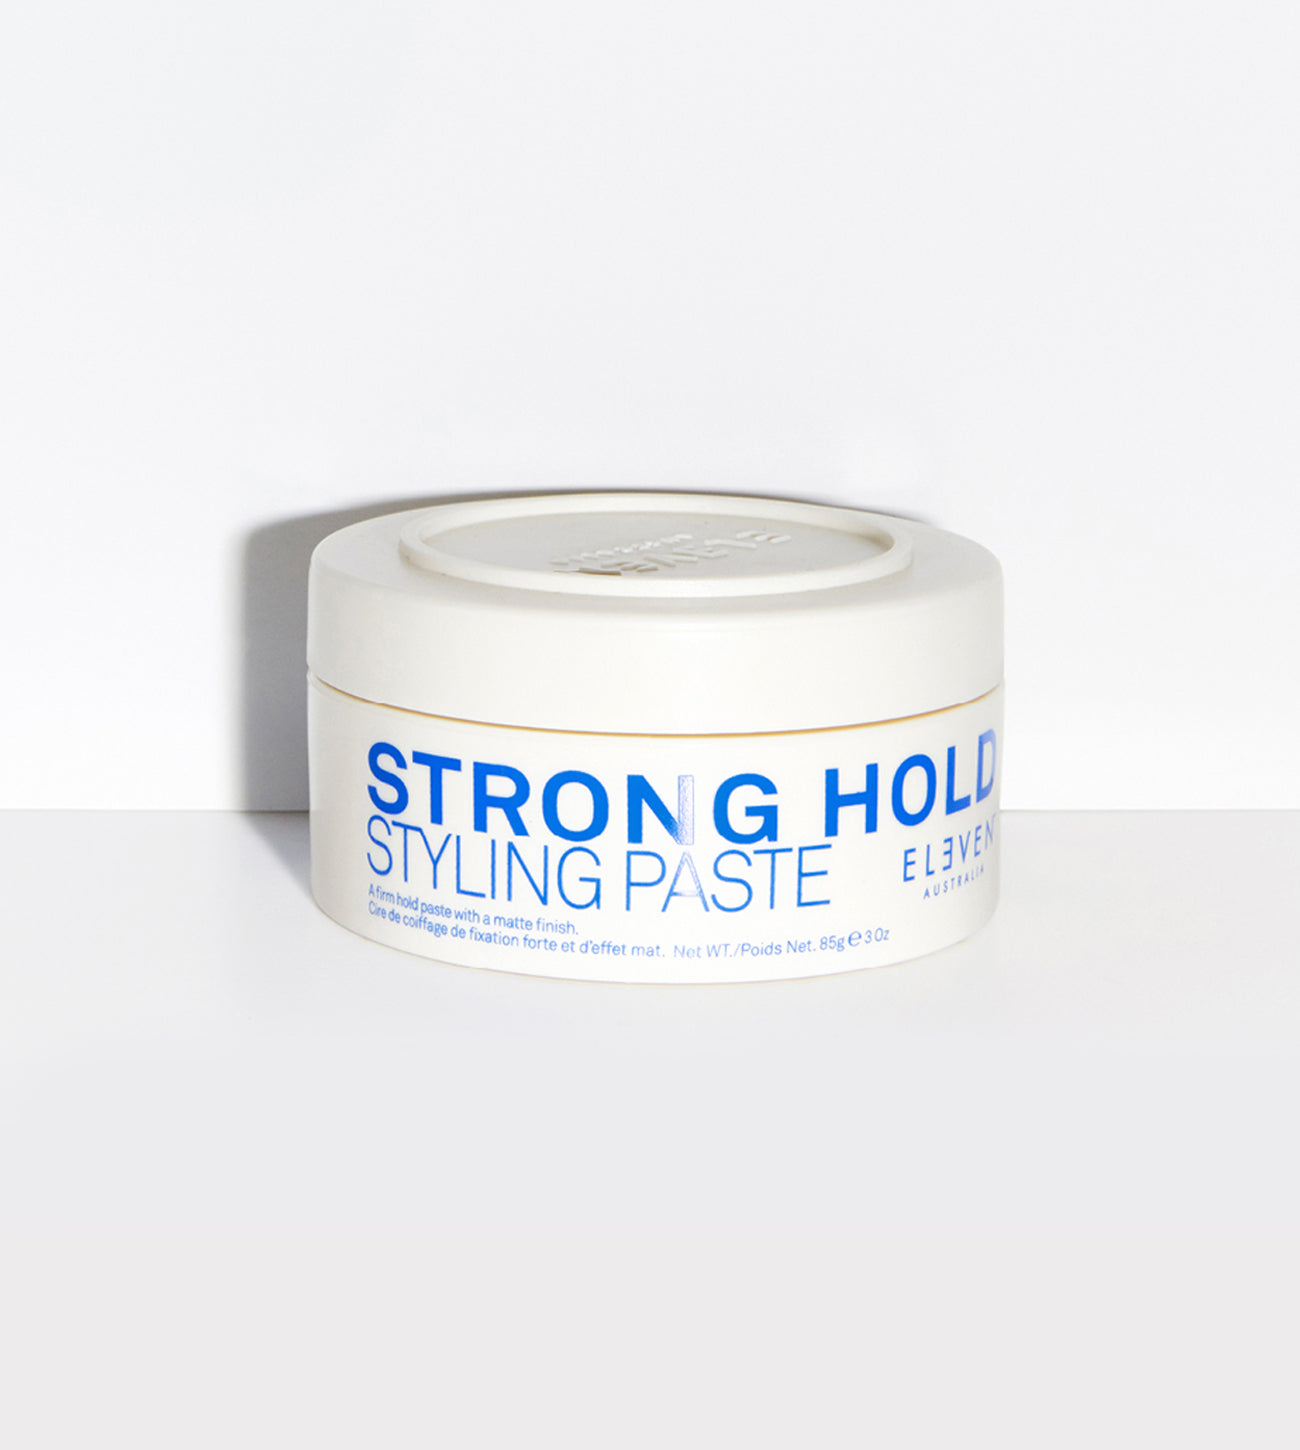 STRONG HOLD STYLING PASTE is a balanced blend of lightweight ingredients to give all-day hold. The product maintains a firm hold and texture through a blend of Beeswax, Castor Seed Oil and PVP. Best for short hair styling.